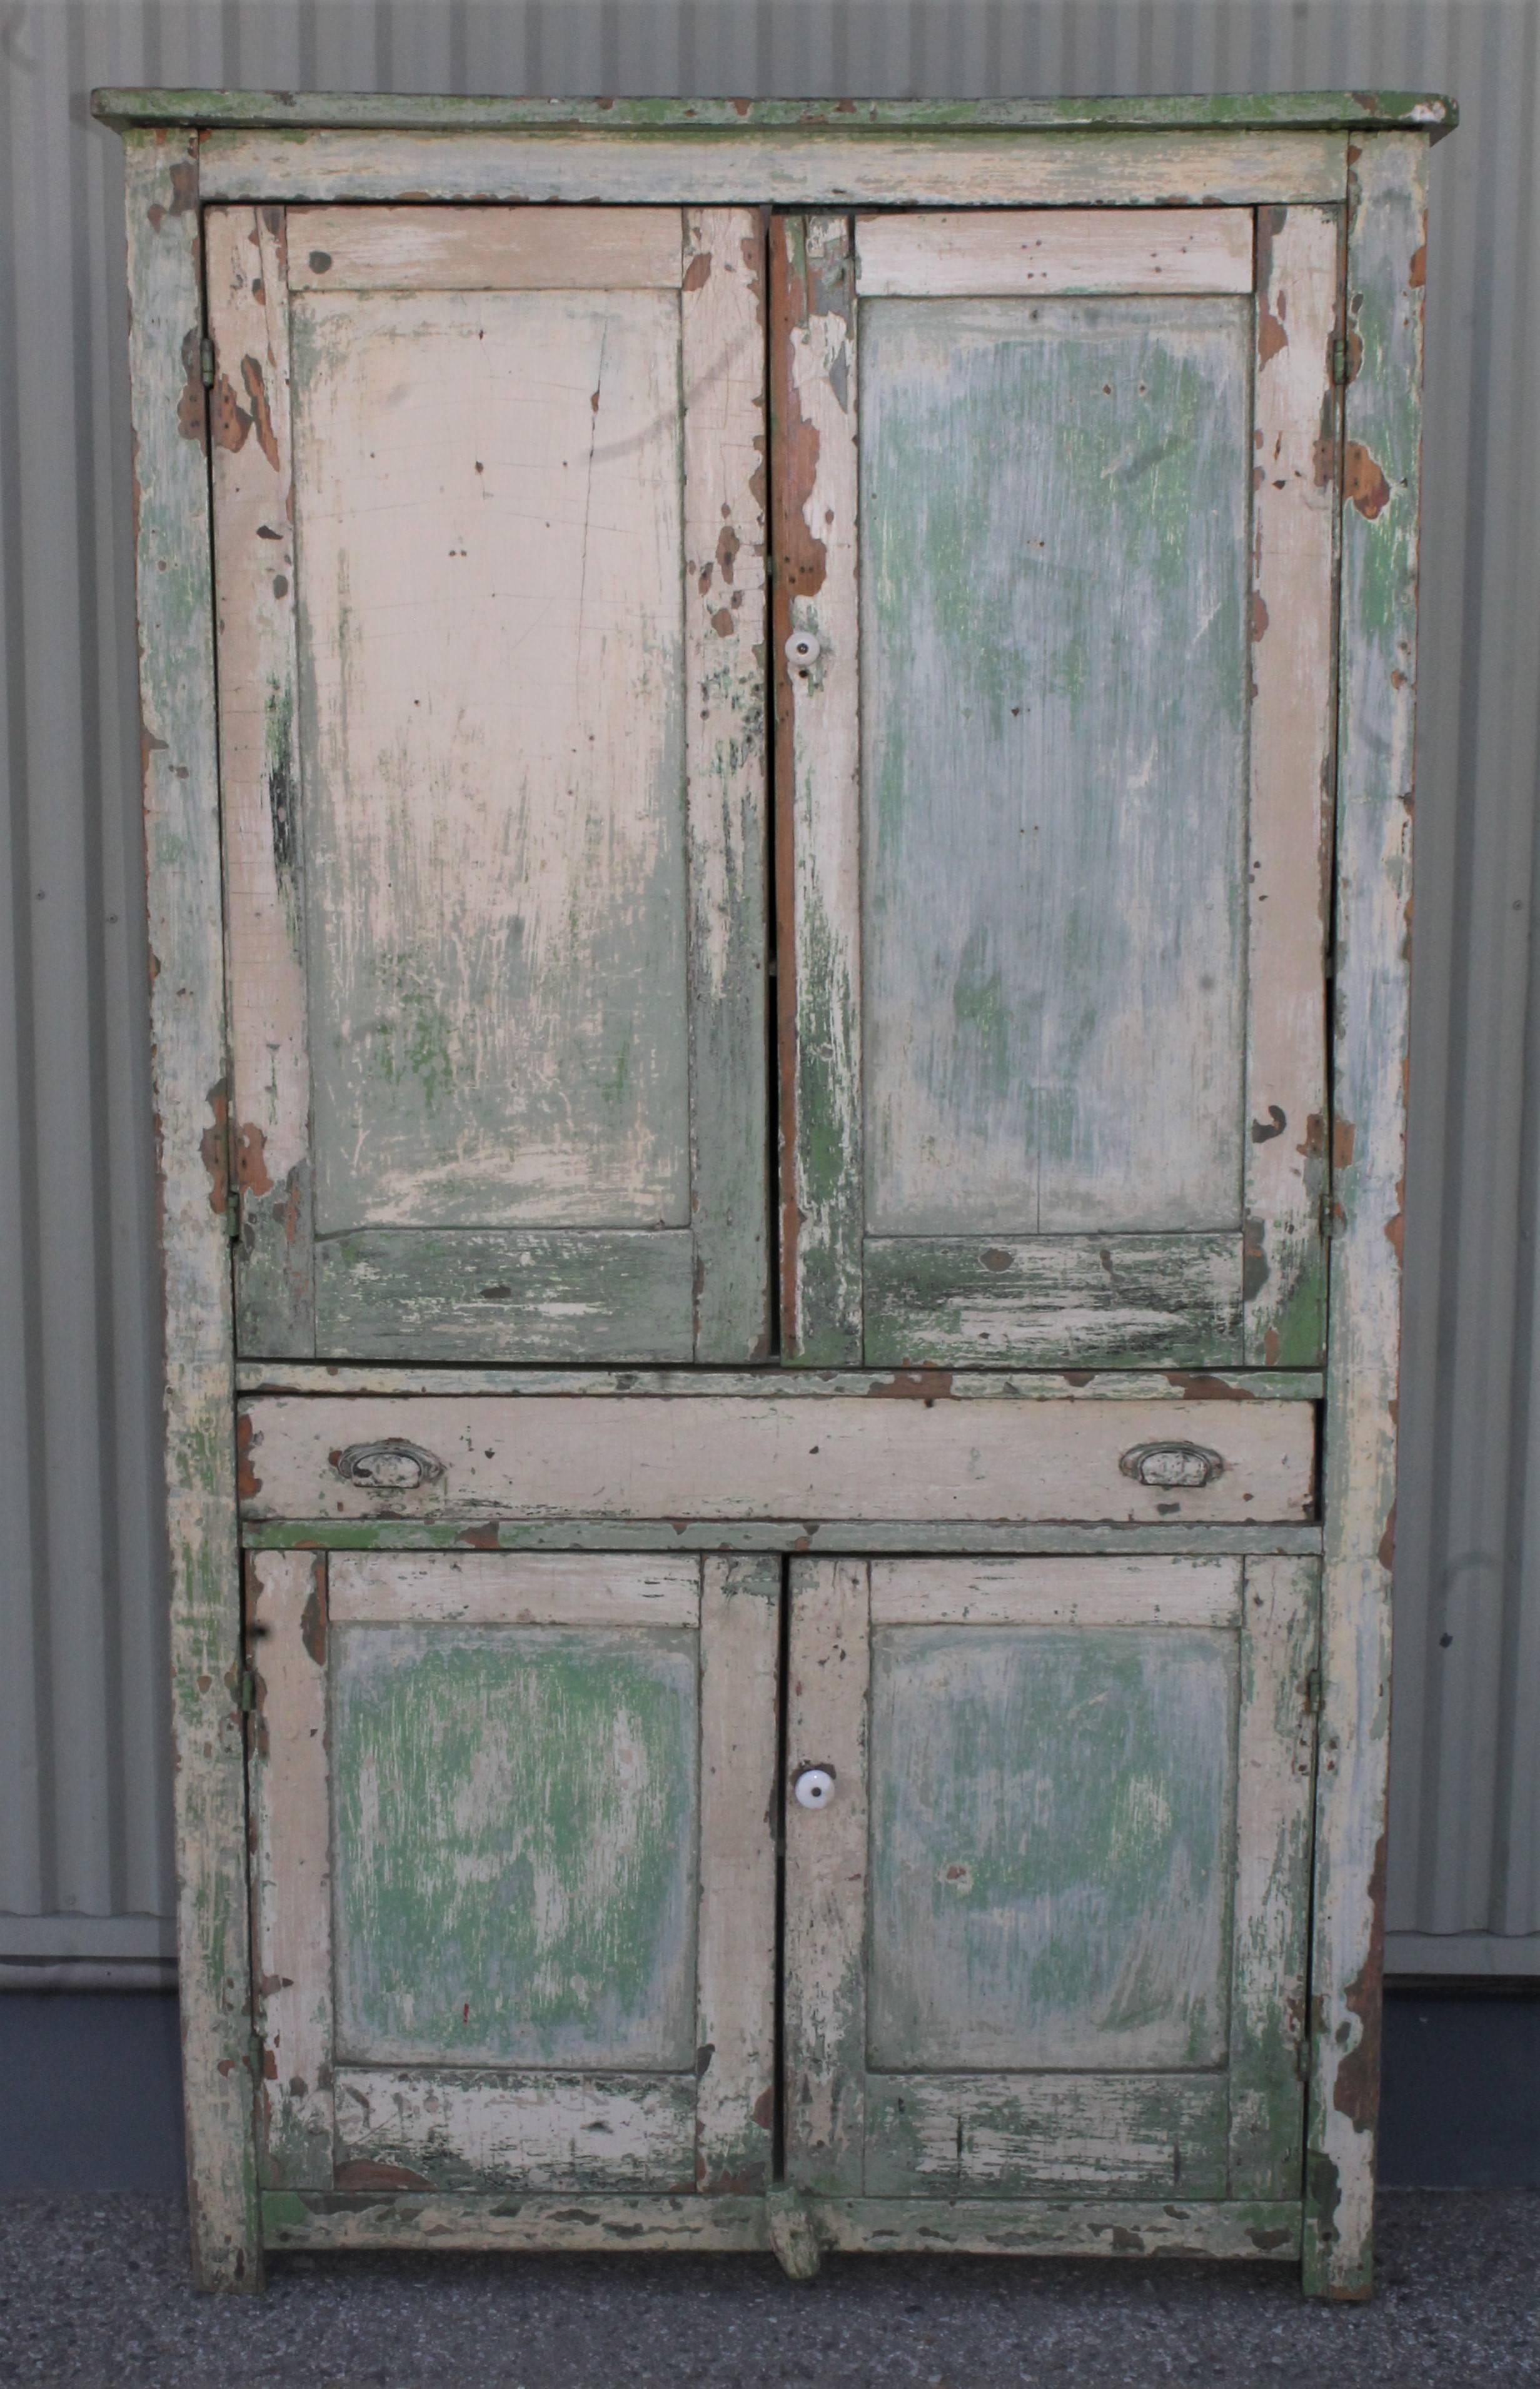 This fine funky Midwestern wall cupboard with a cream over green worn and aged painted surface. This 19th century funky four door wall cupboard is in good, worn condition. The interior is in a original apple green painted surface.